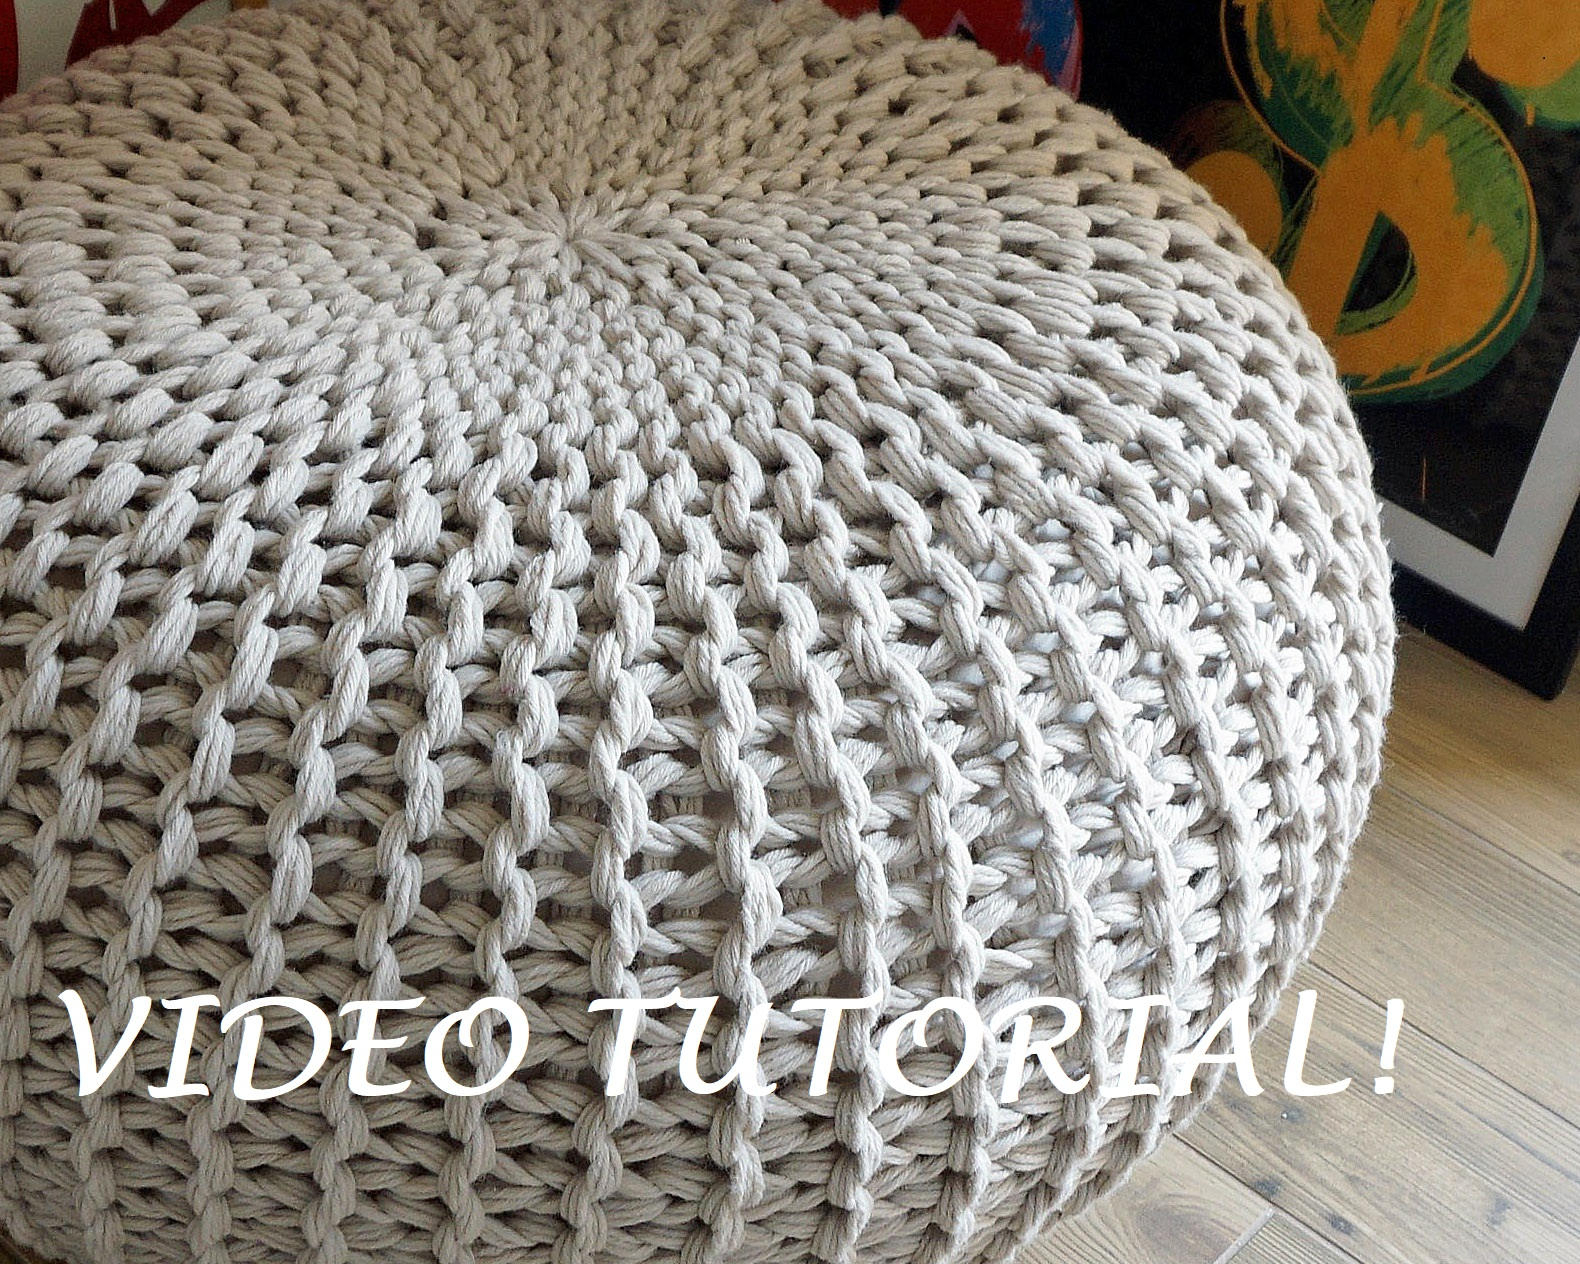 Knitted Pattern Knitting Pattern Knitted Pouf Pattern Poof Knitting Ottoman Footstool Home Decor Pillow Bean Bag Pouffe Floor Cushion Medium And Large